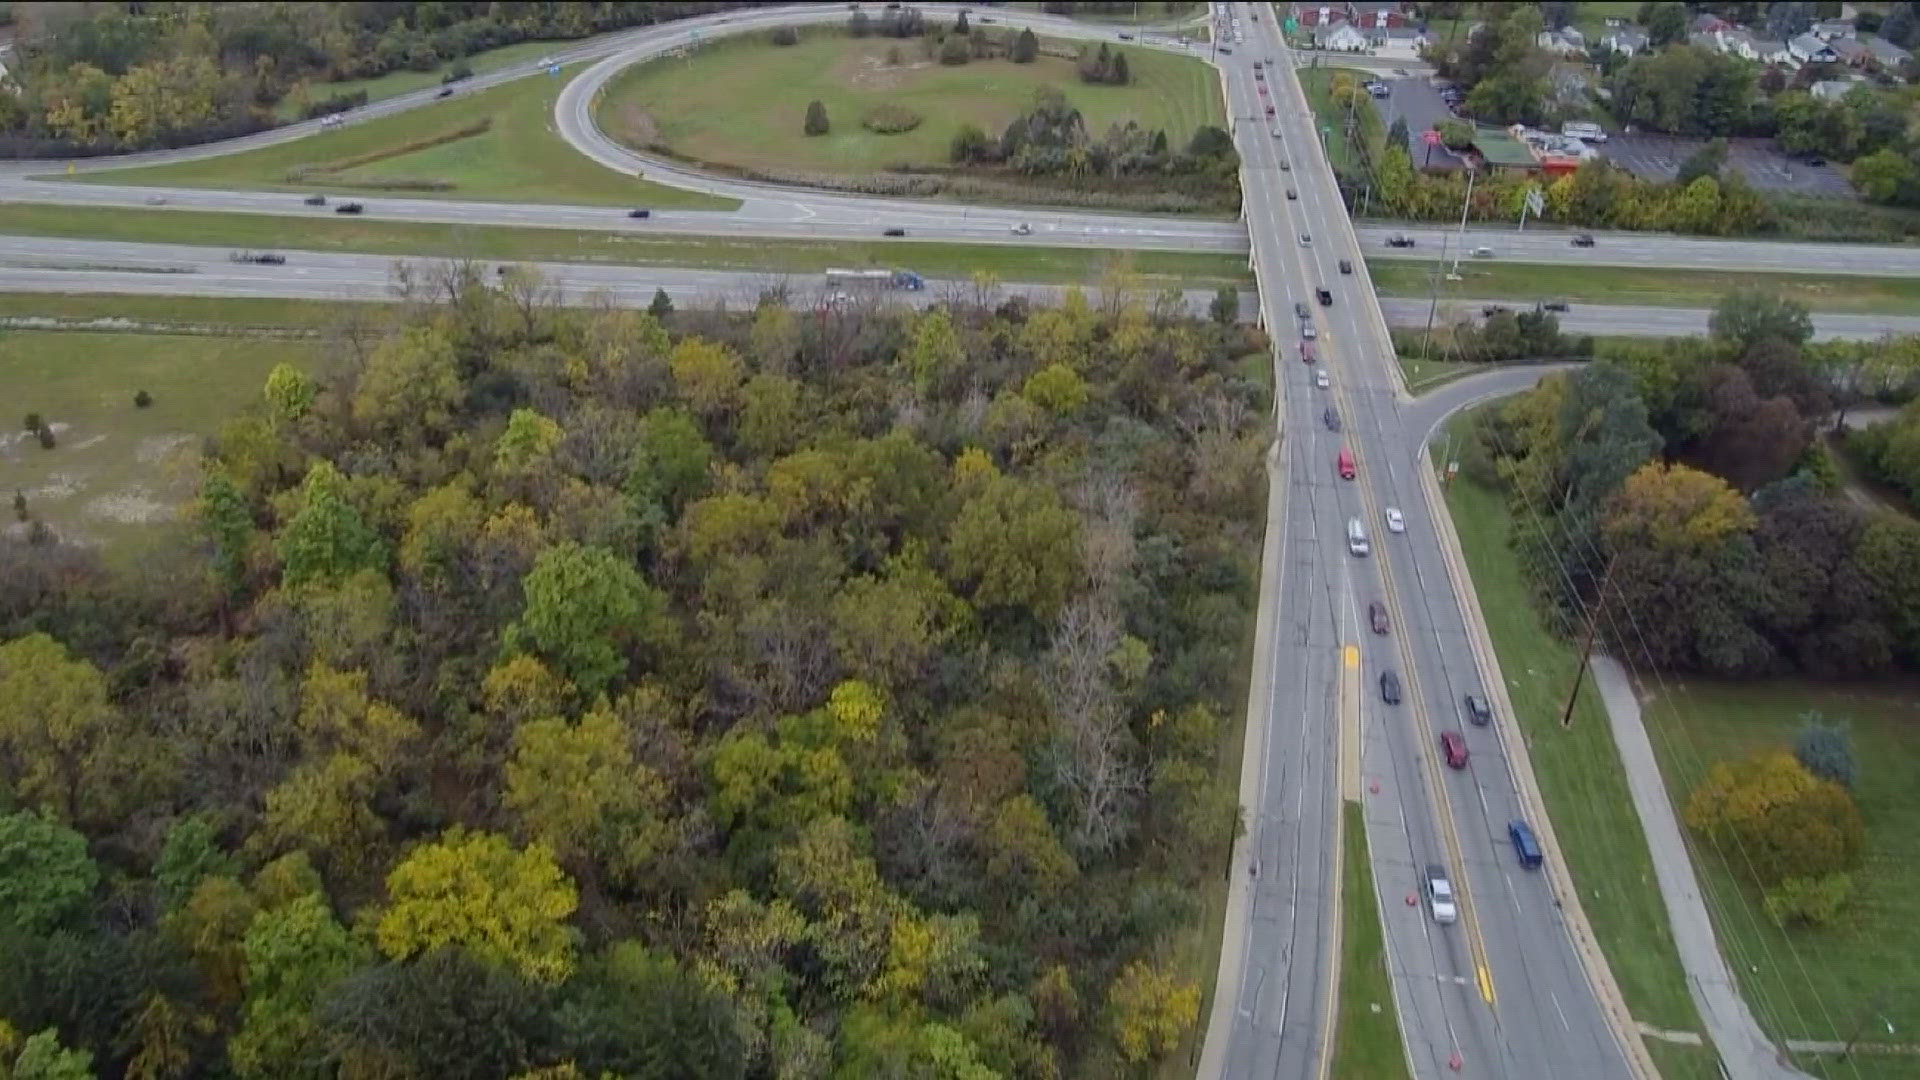 Gov. DeWine says that daily travel on the 23-mile stretch of U.S. 23 from Worthington to Waldo exceeds the road's capacity by 30%, causing crashes and congestion.